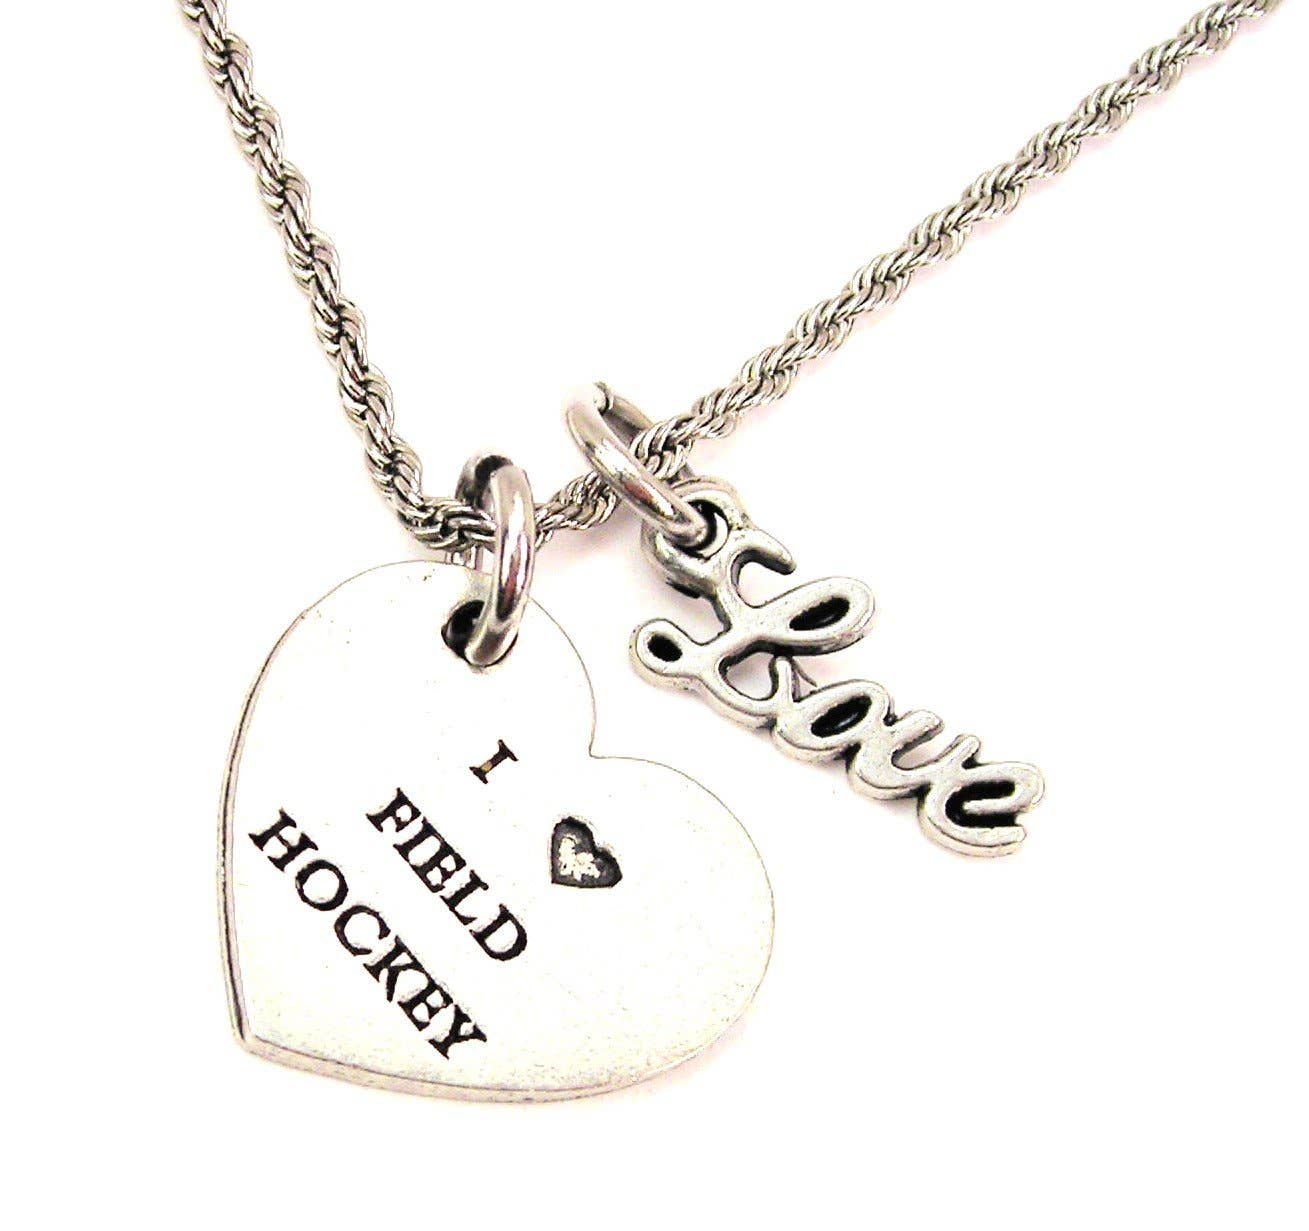 ChubbyChicoCharms Meow Paw Print Stainless Steel Rope Chain Cursive Love Necklace 